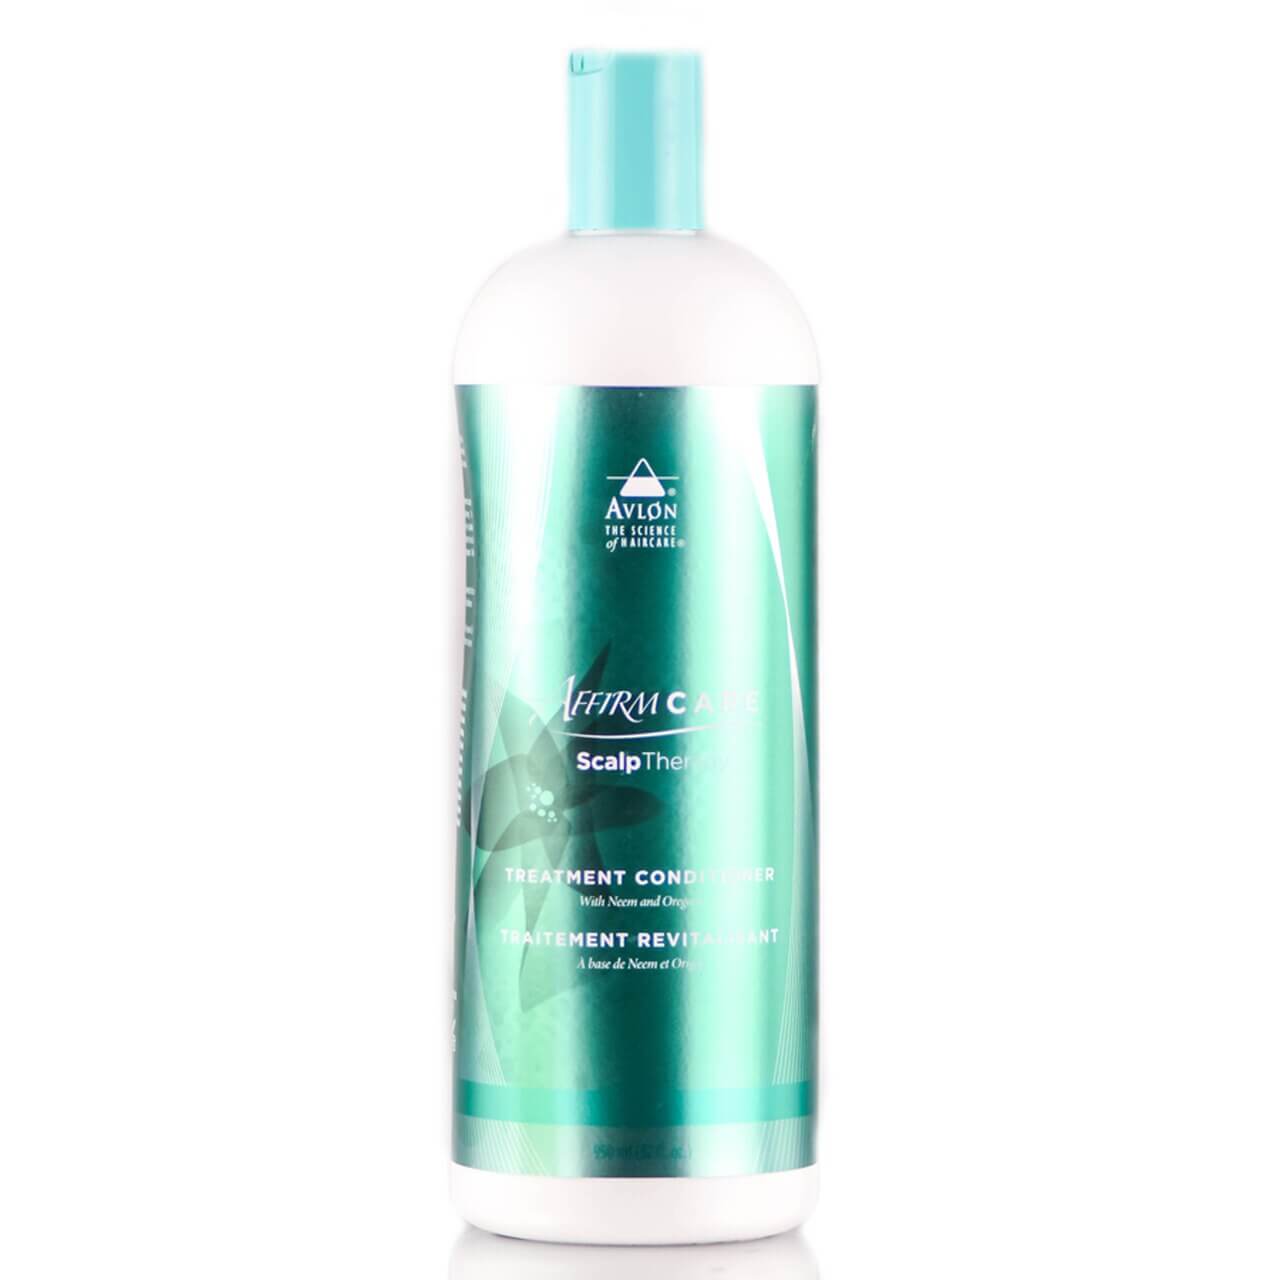 AffirmCare Scalp Therapy Hydrating Anti-dandruff Treatment Conditioner